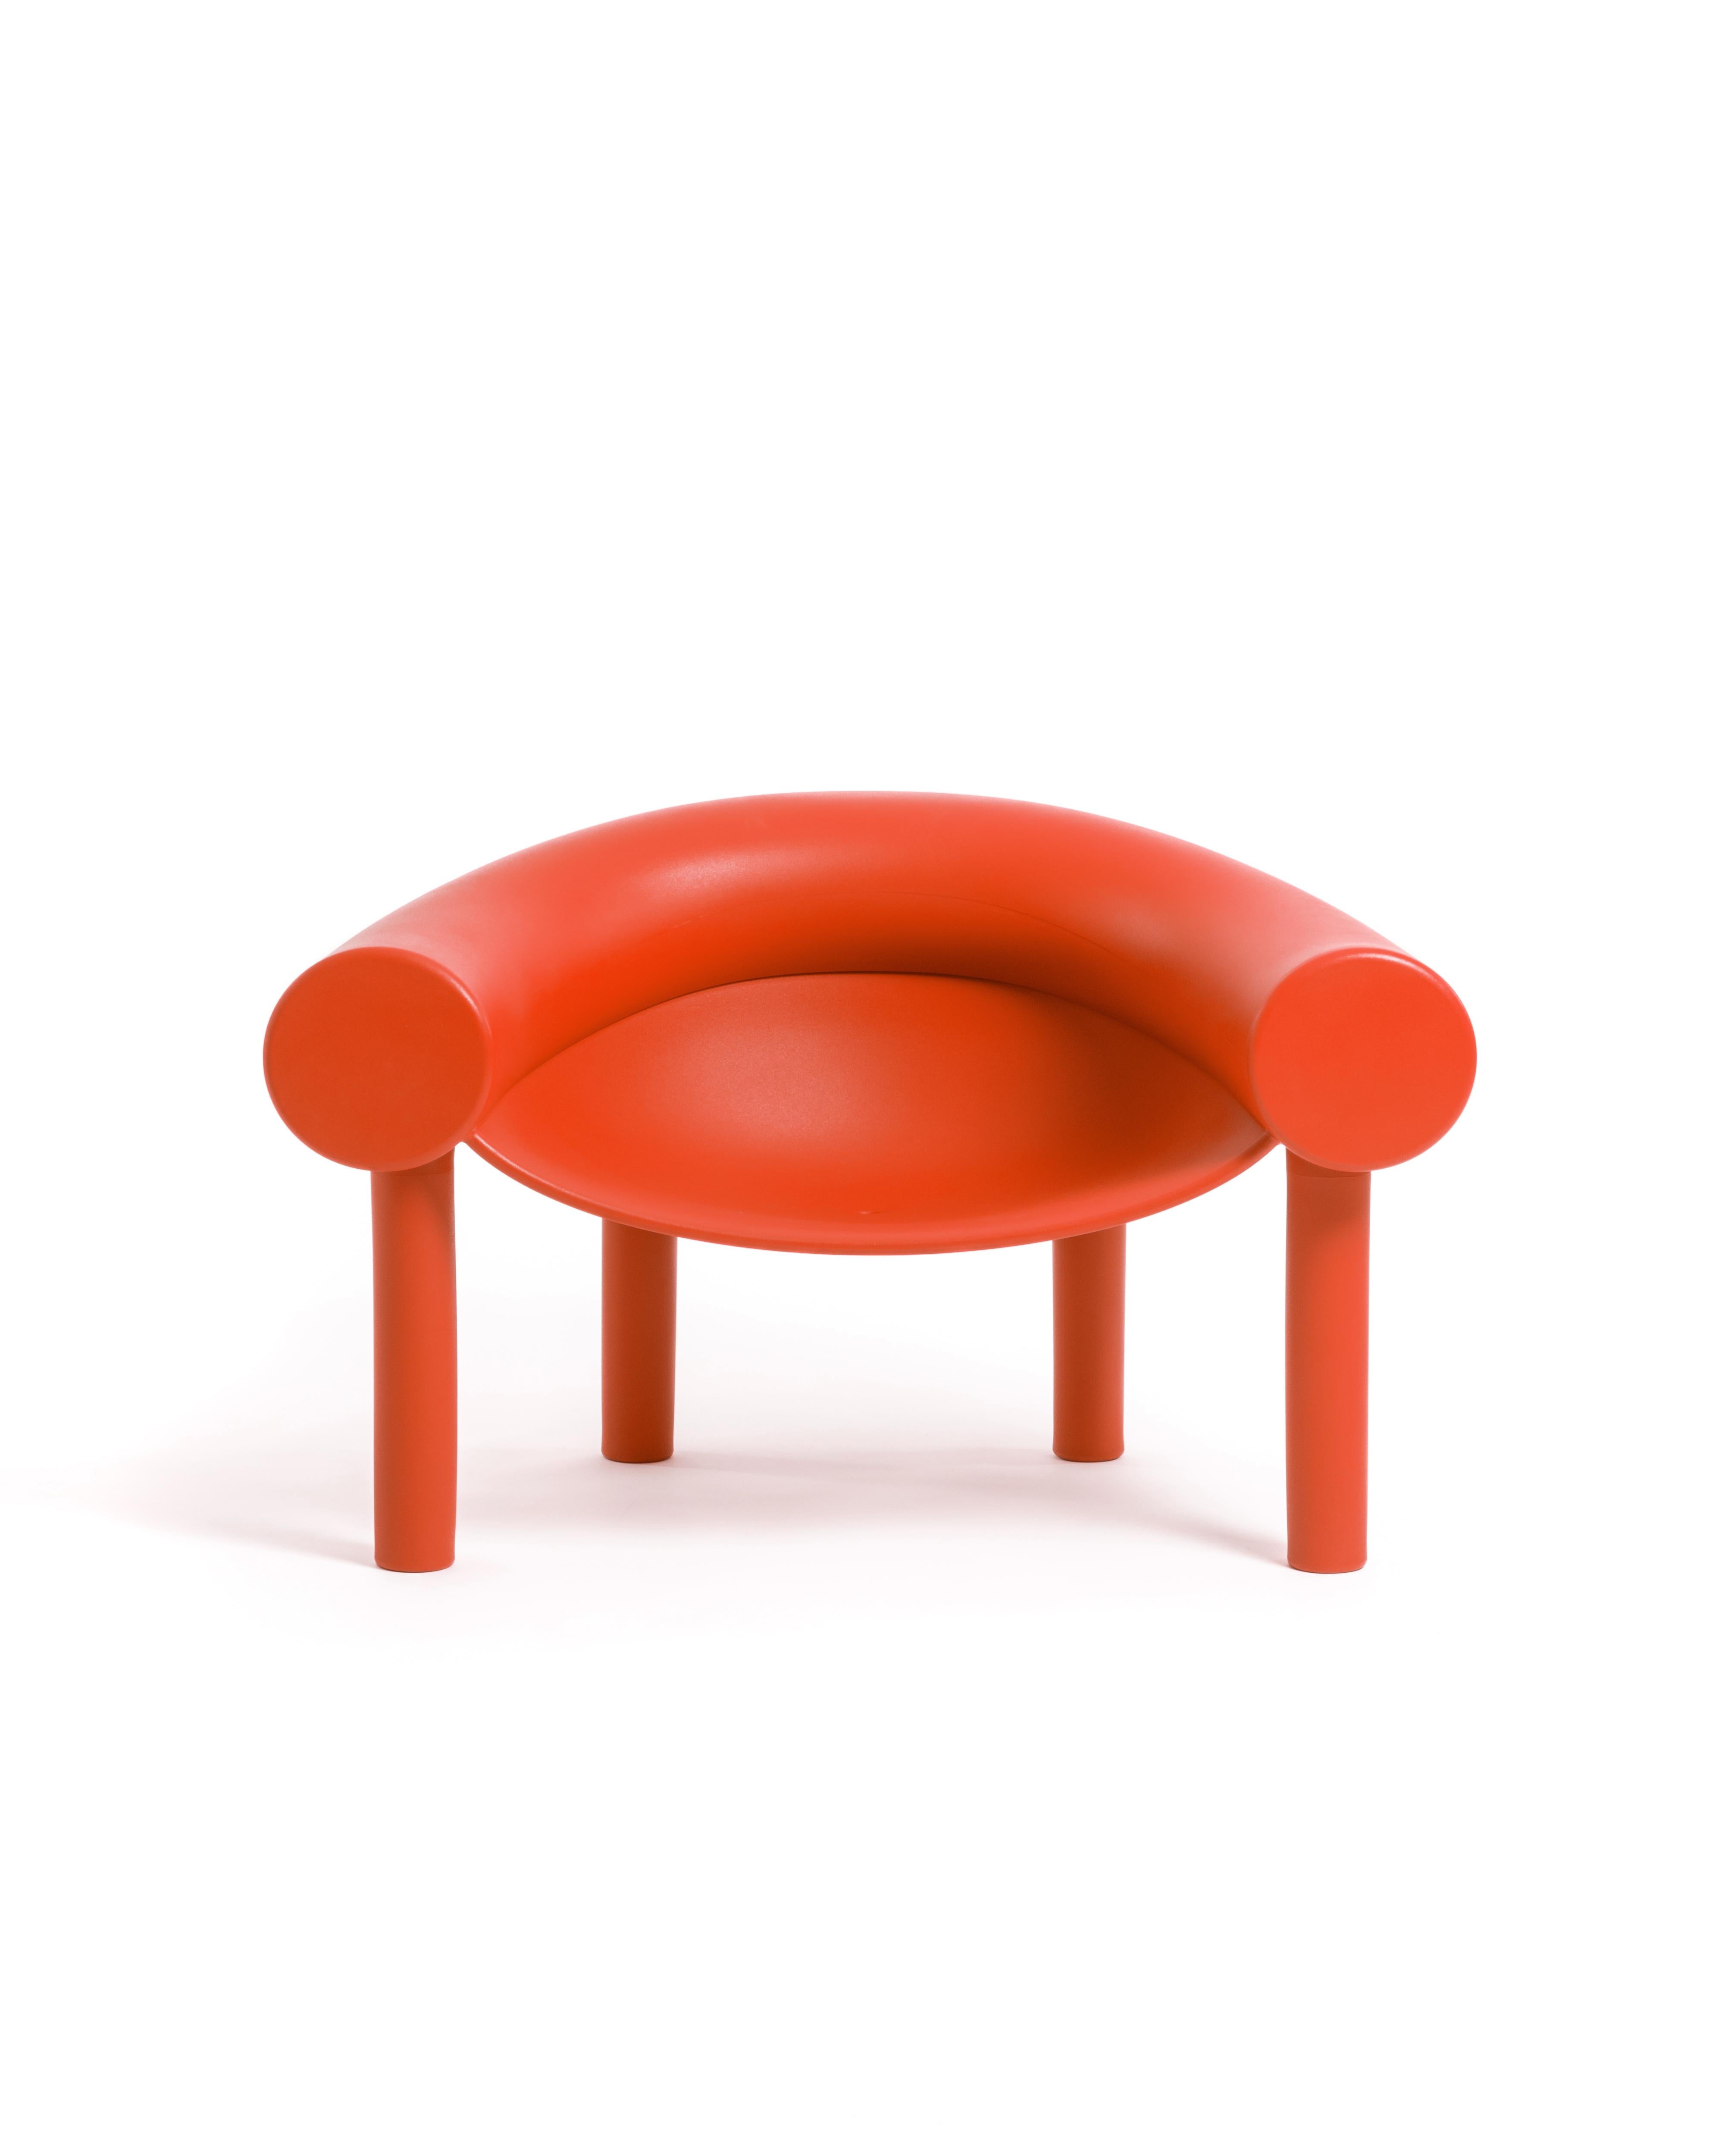 Sam Son Armchair in Red by Konstantin Grcic for MAGIS